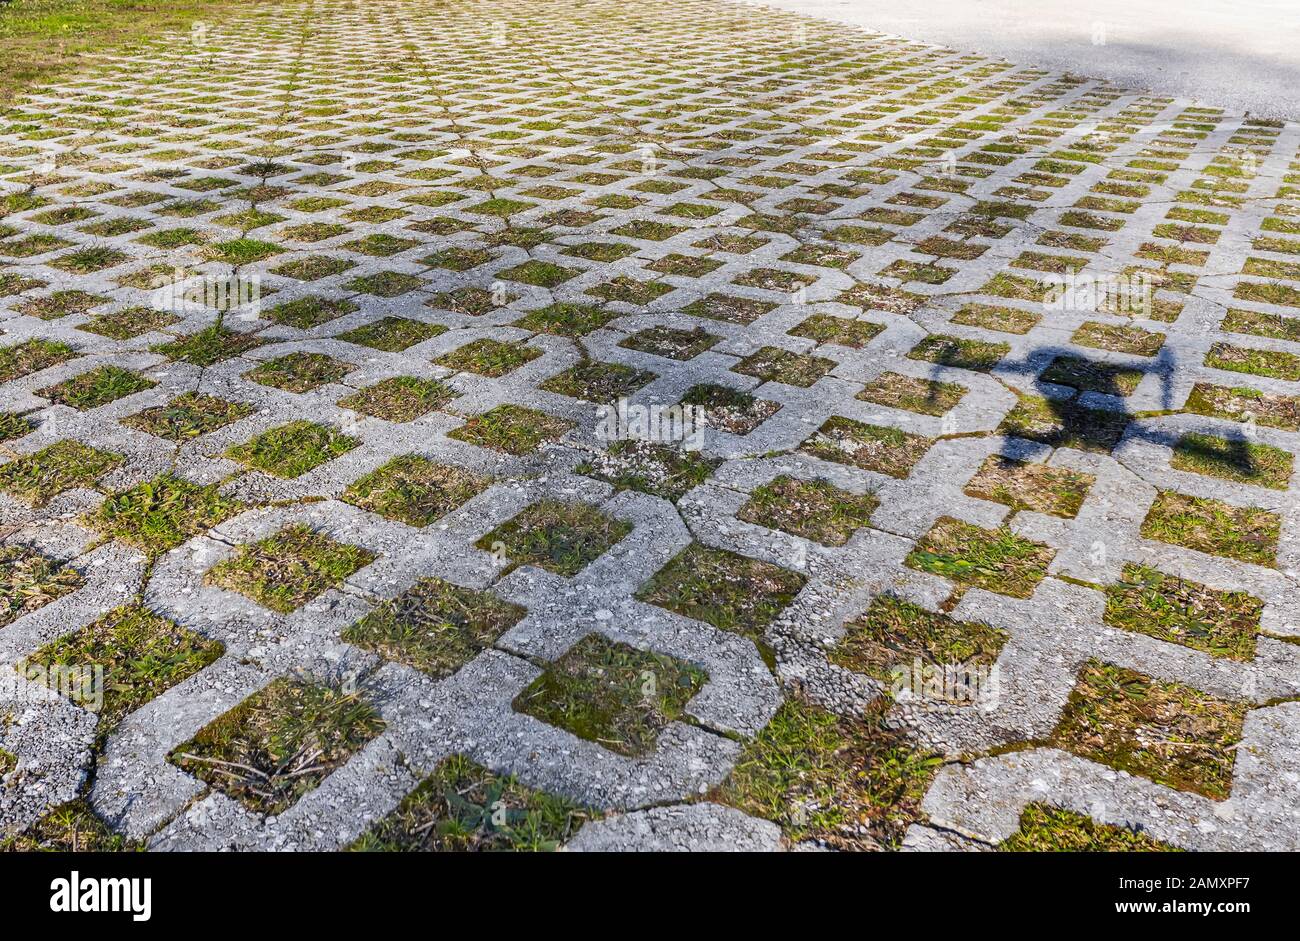 the shadow of a drone on a tiled plateau Stock Photo